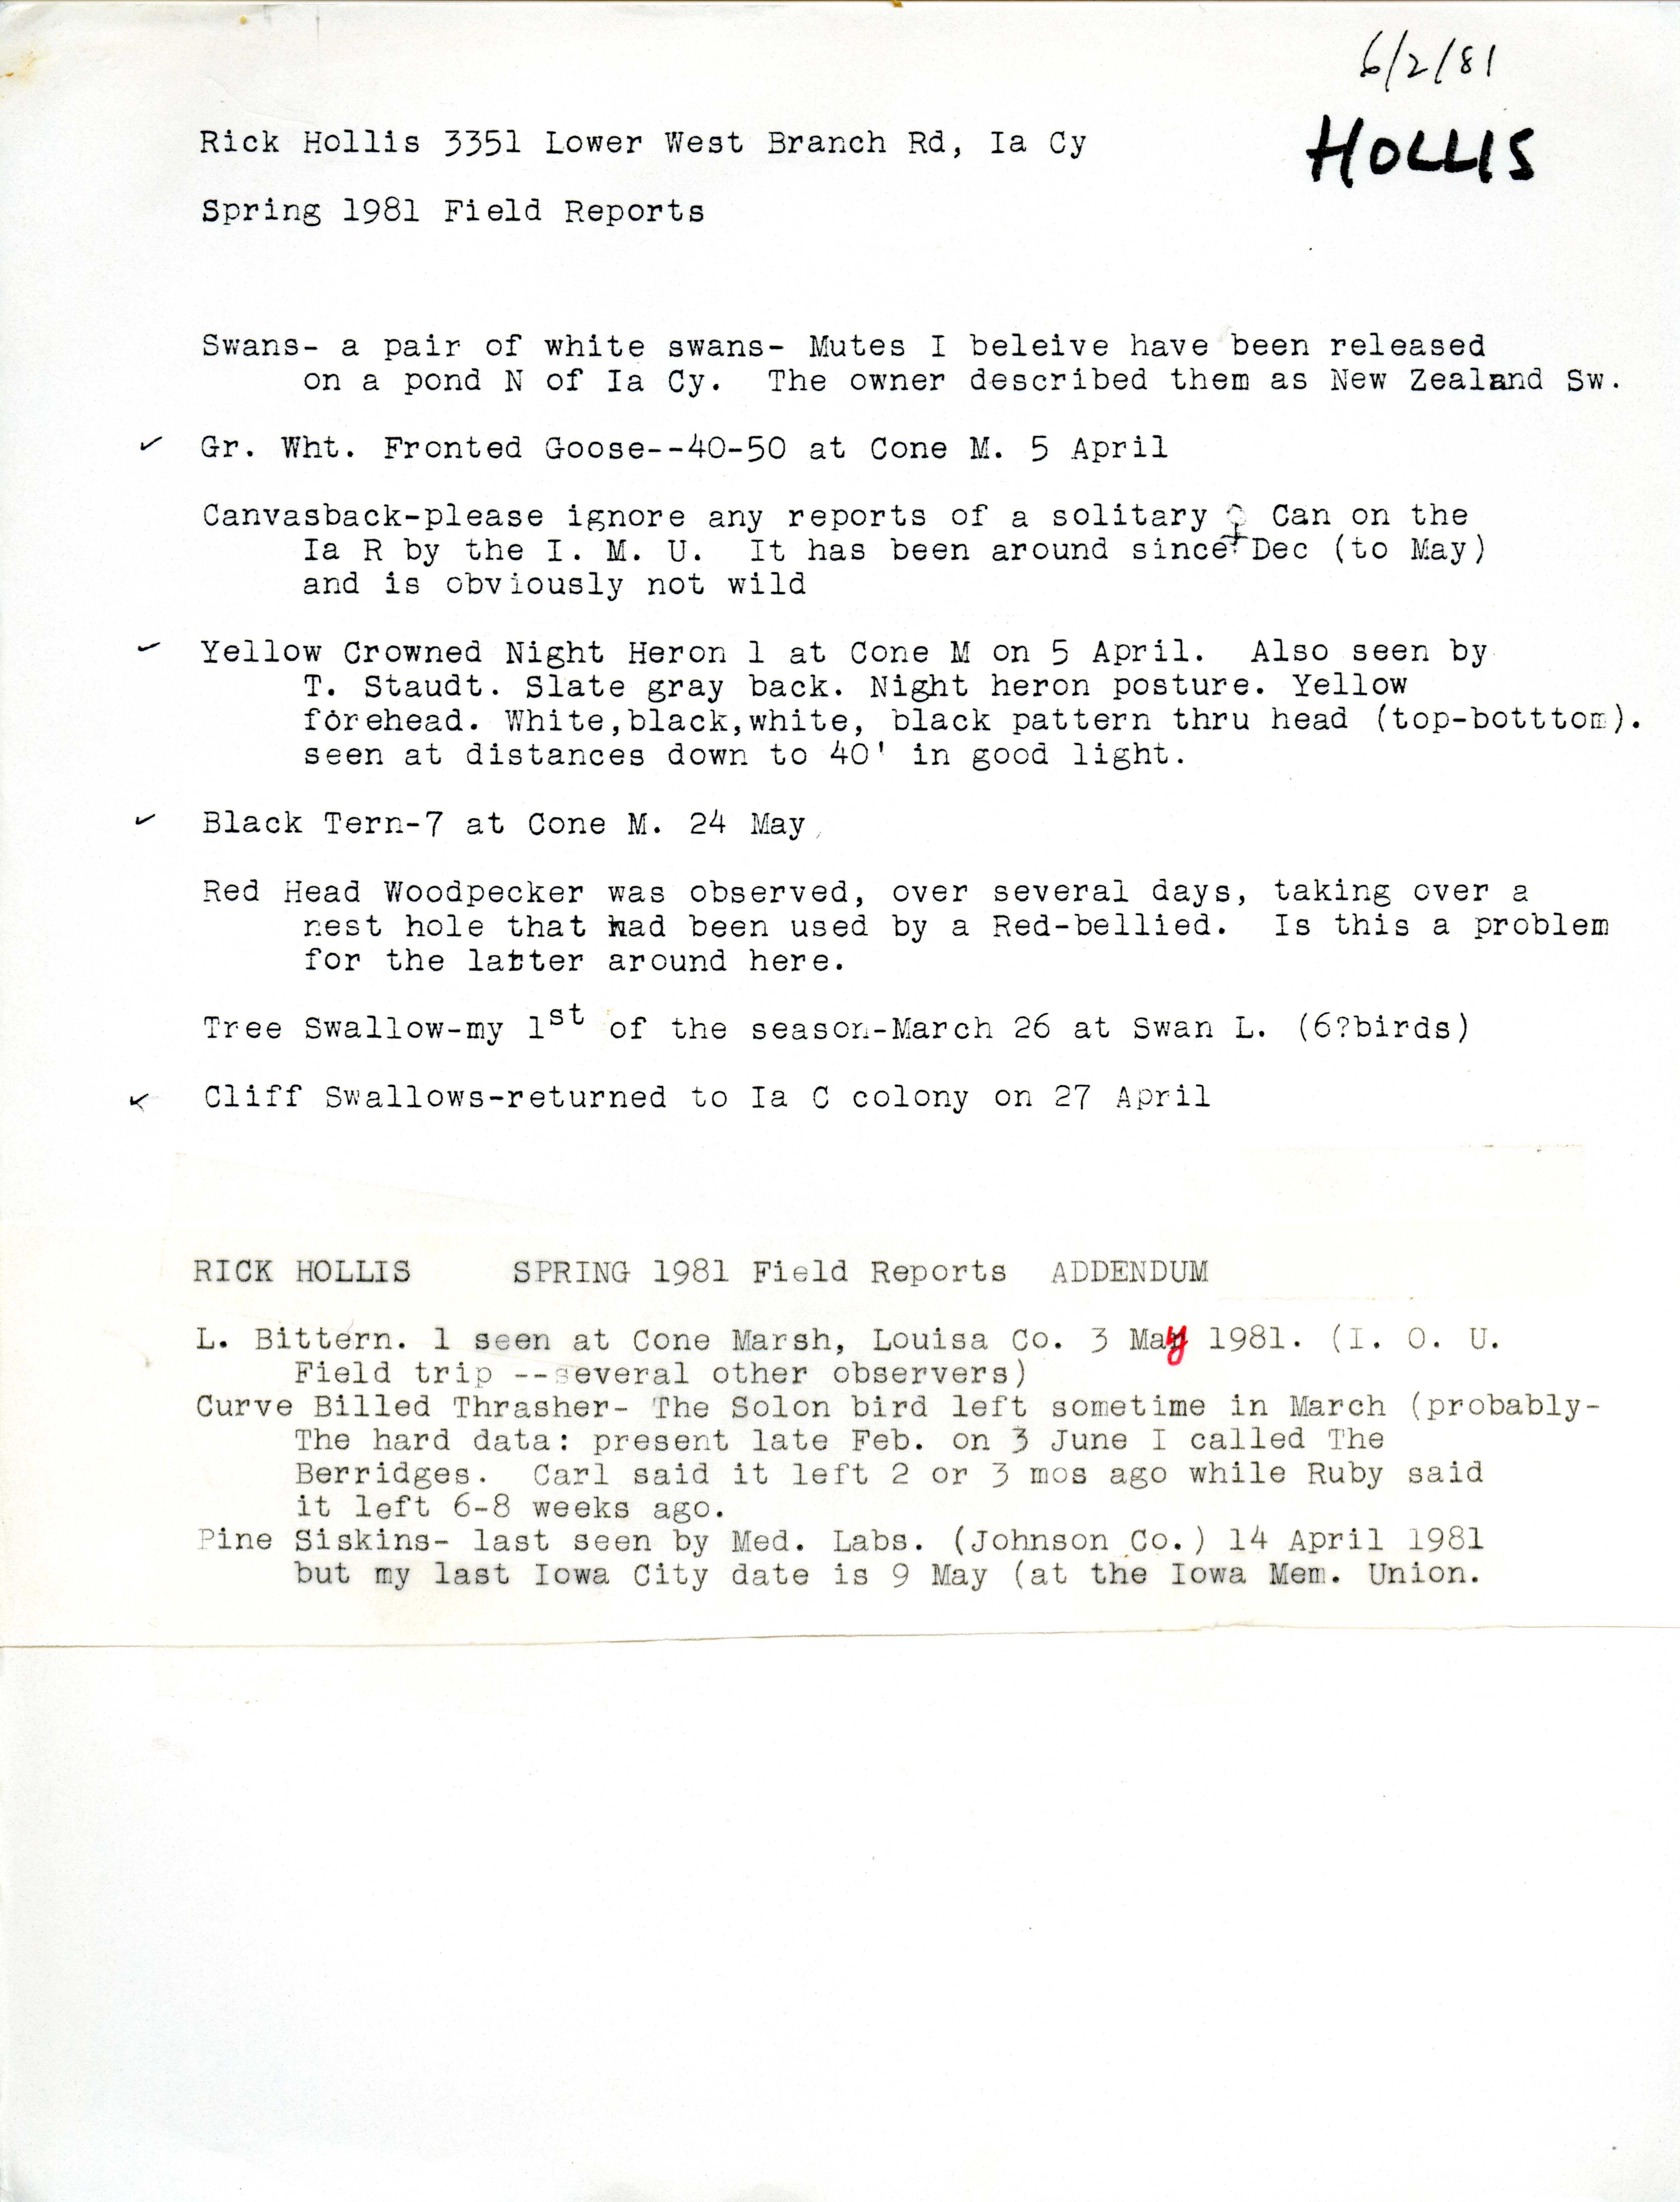 Spring 1981 field reports